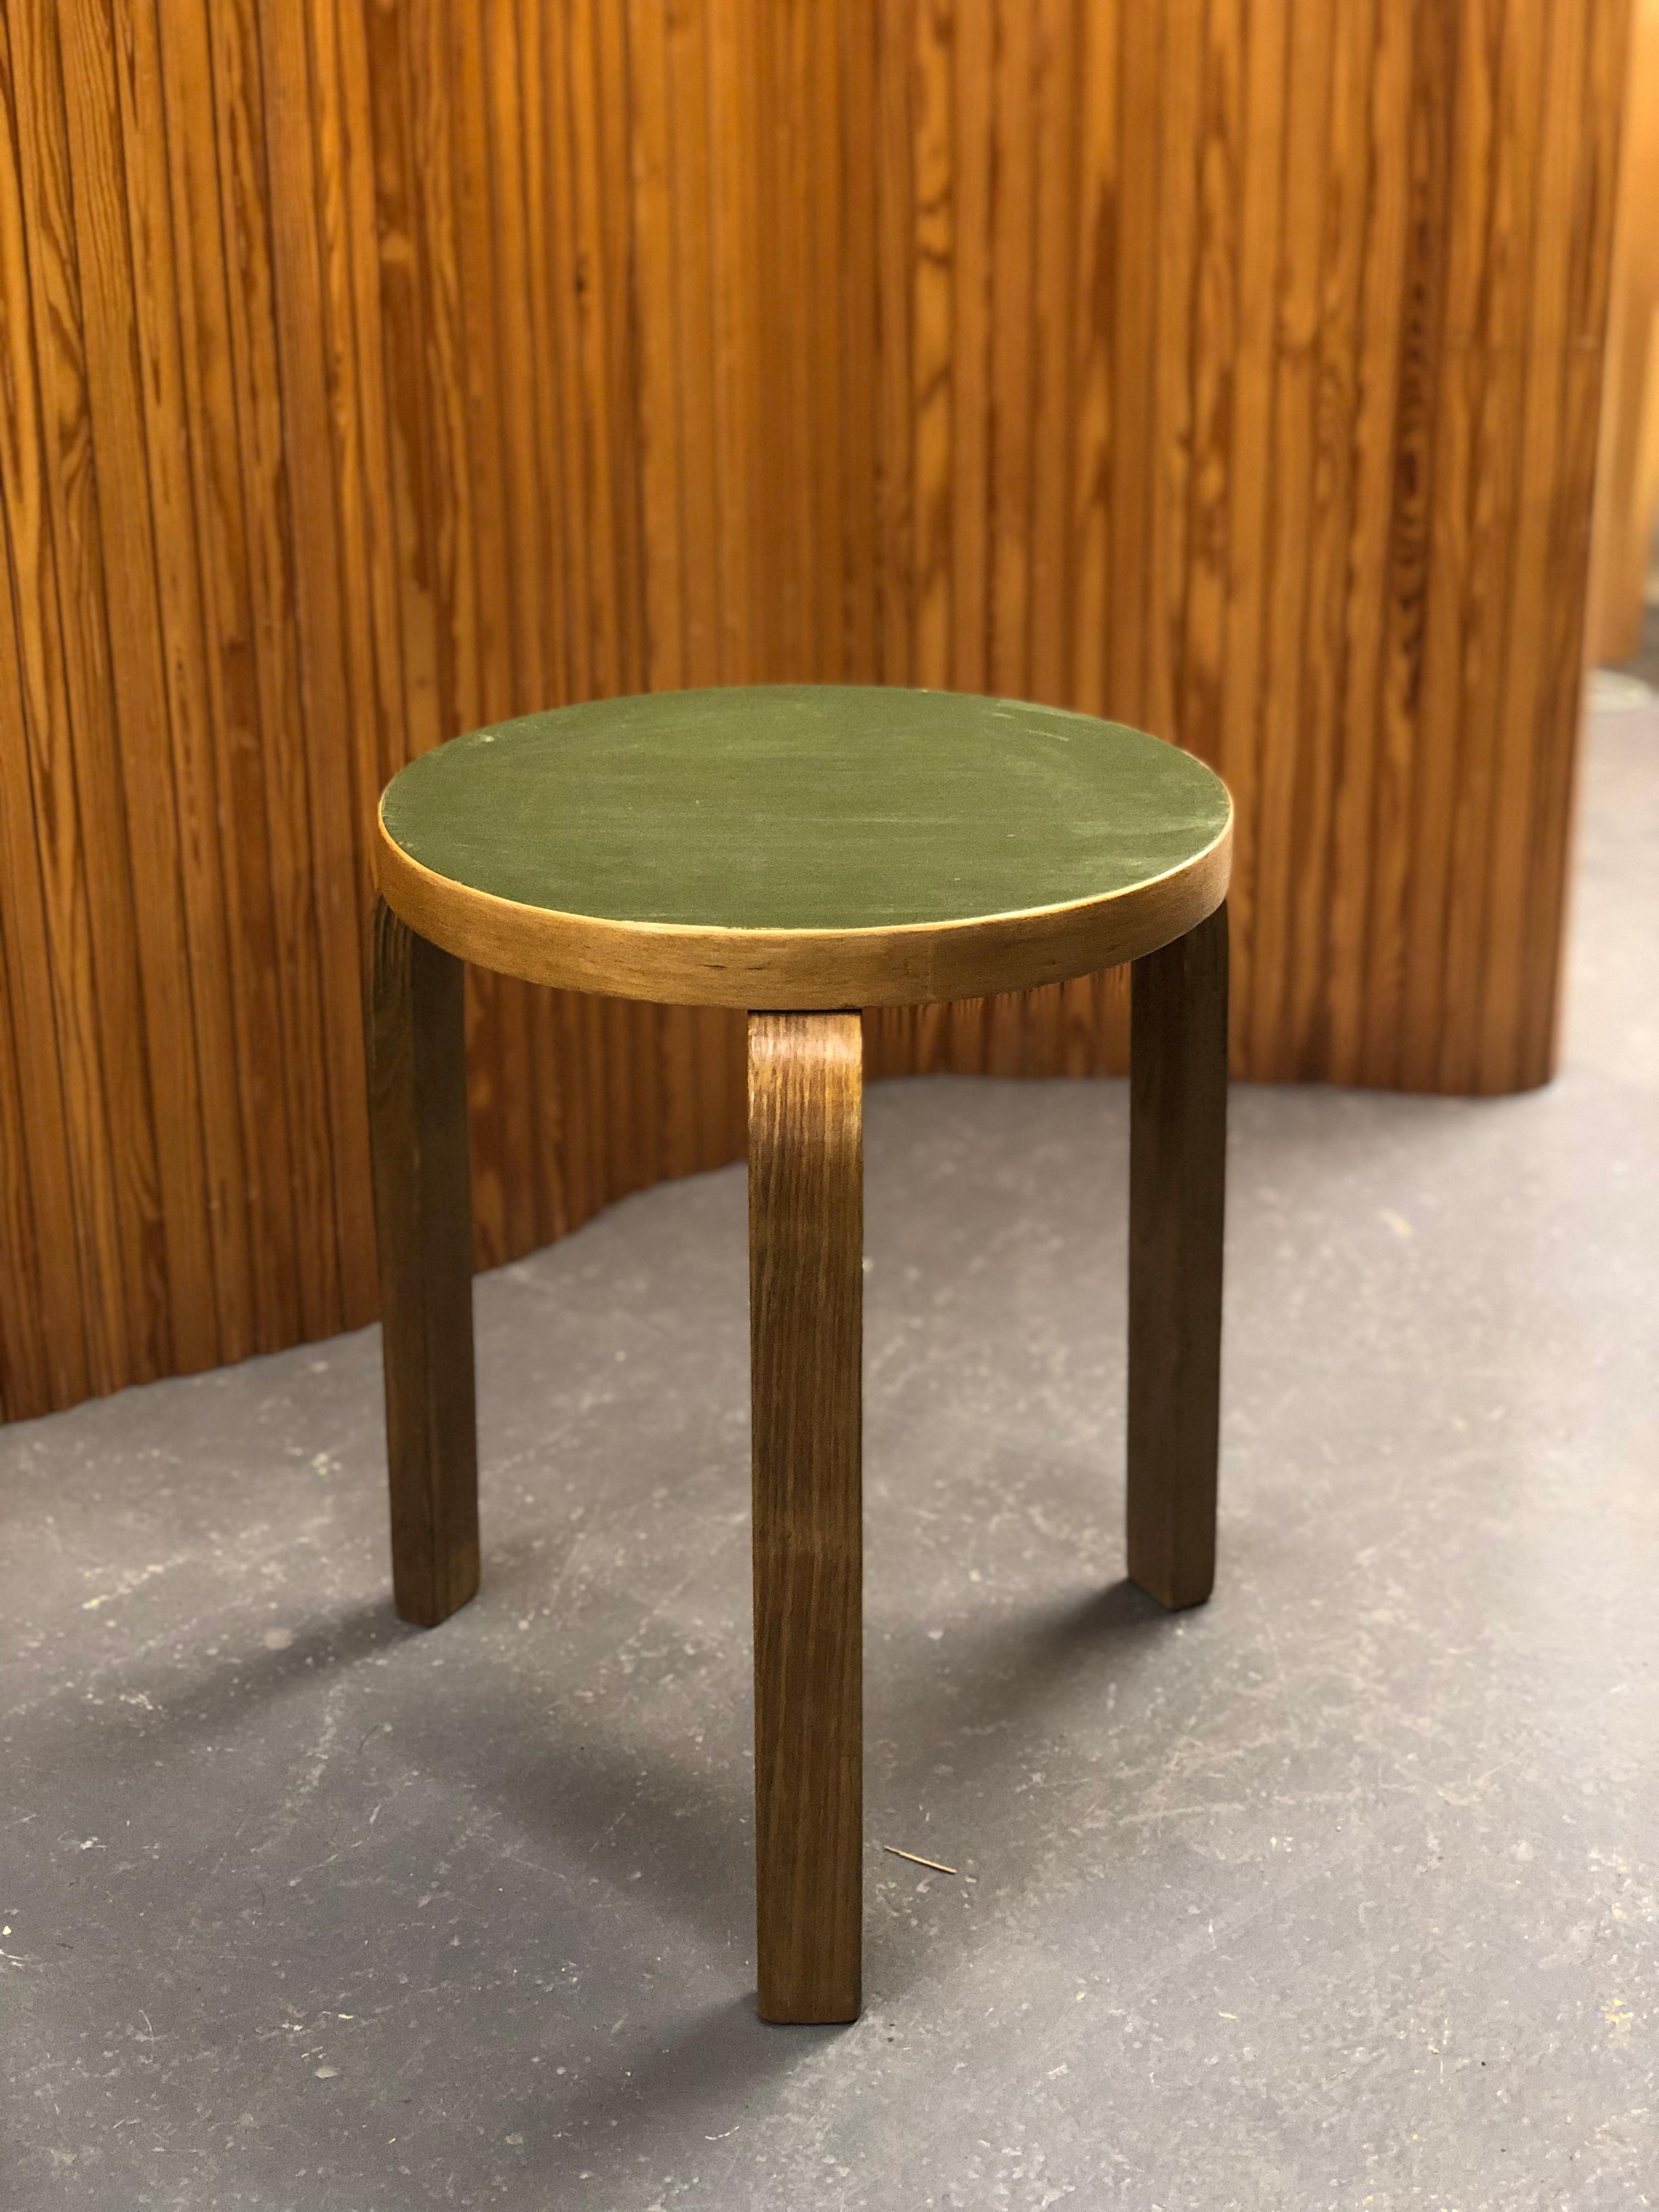 Artek stool in birch and green linoleum, designed by Alvar Aalto and manufactured by Artek in the 1950s. The model 60 stool is perhaps the most well known Aalto design and has always been attractive to people. As with a lot of Alvar Aalto's works